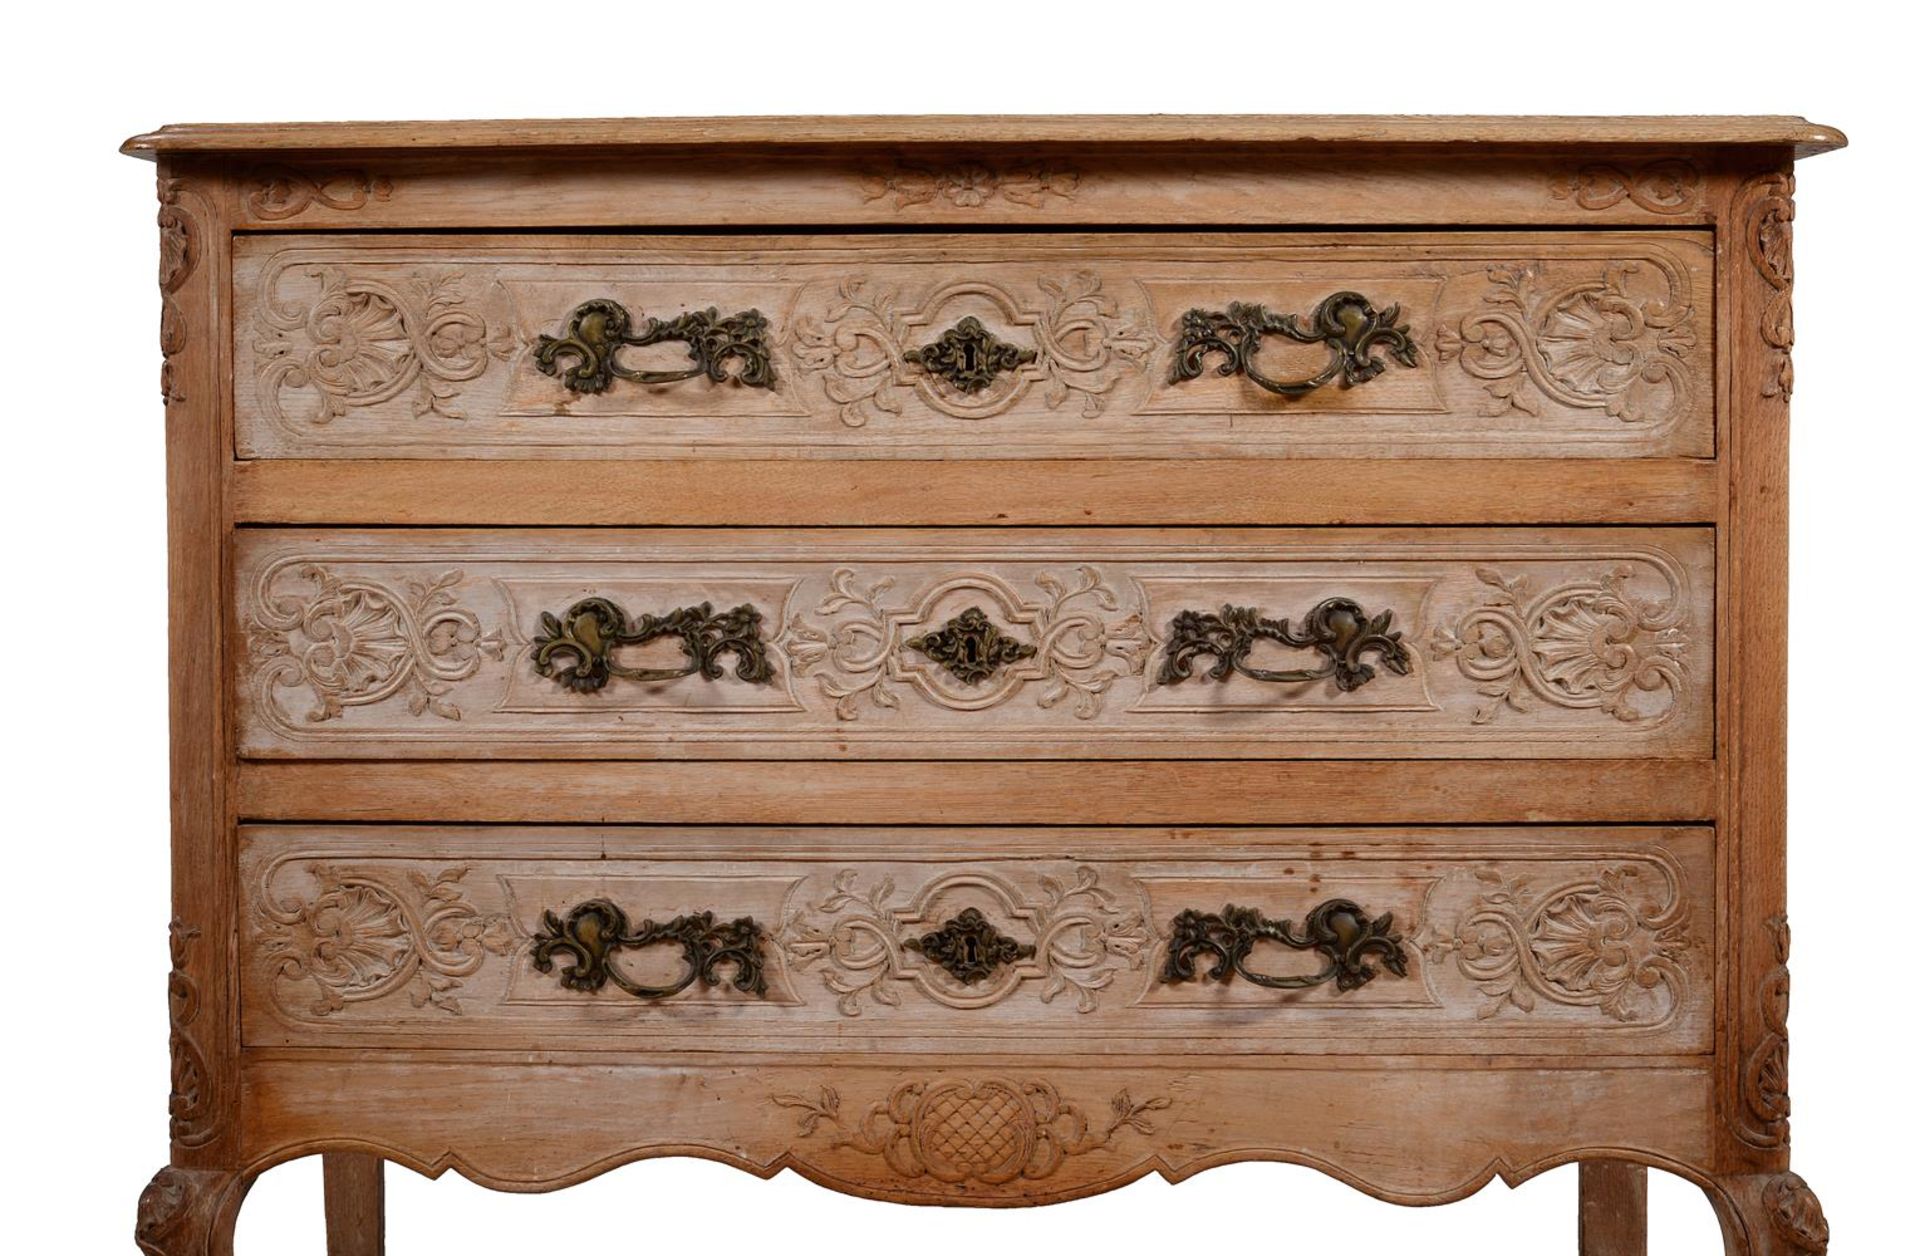 A French oak commode in Louis XVI style - Image 2 of 2